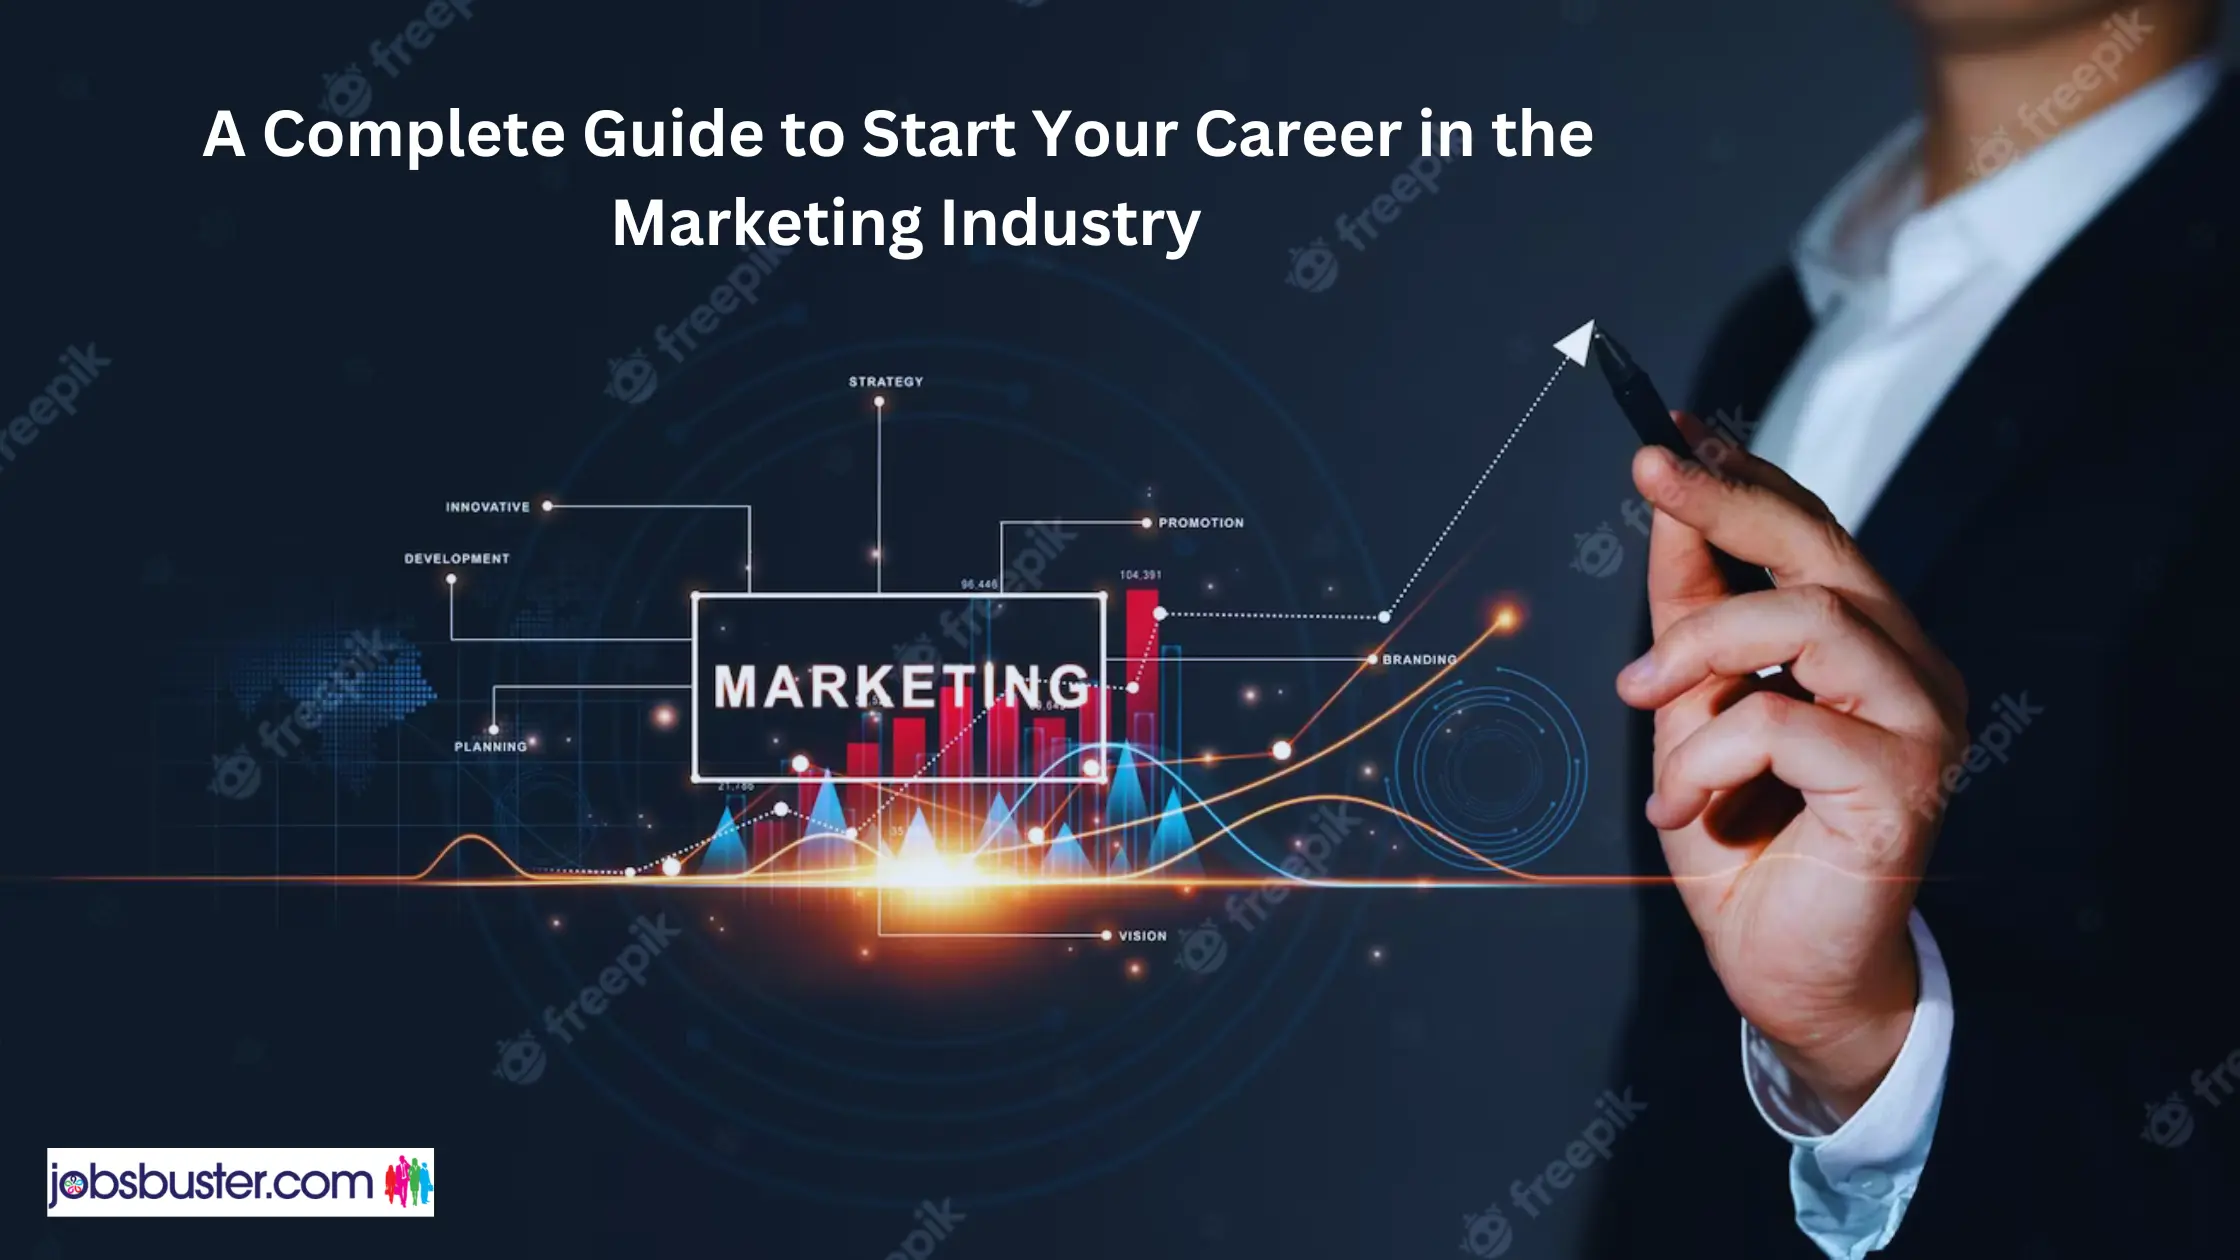 A Complete Guide to Start Your Career in the Marketing Industry